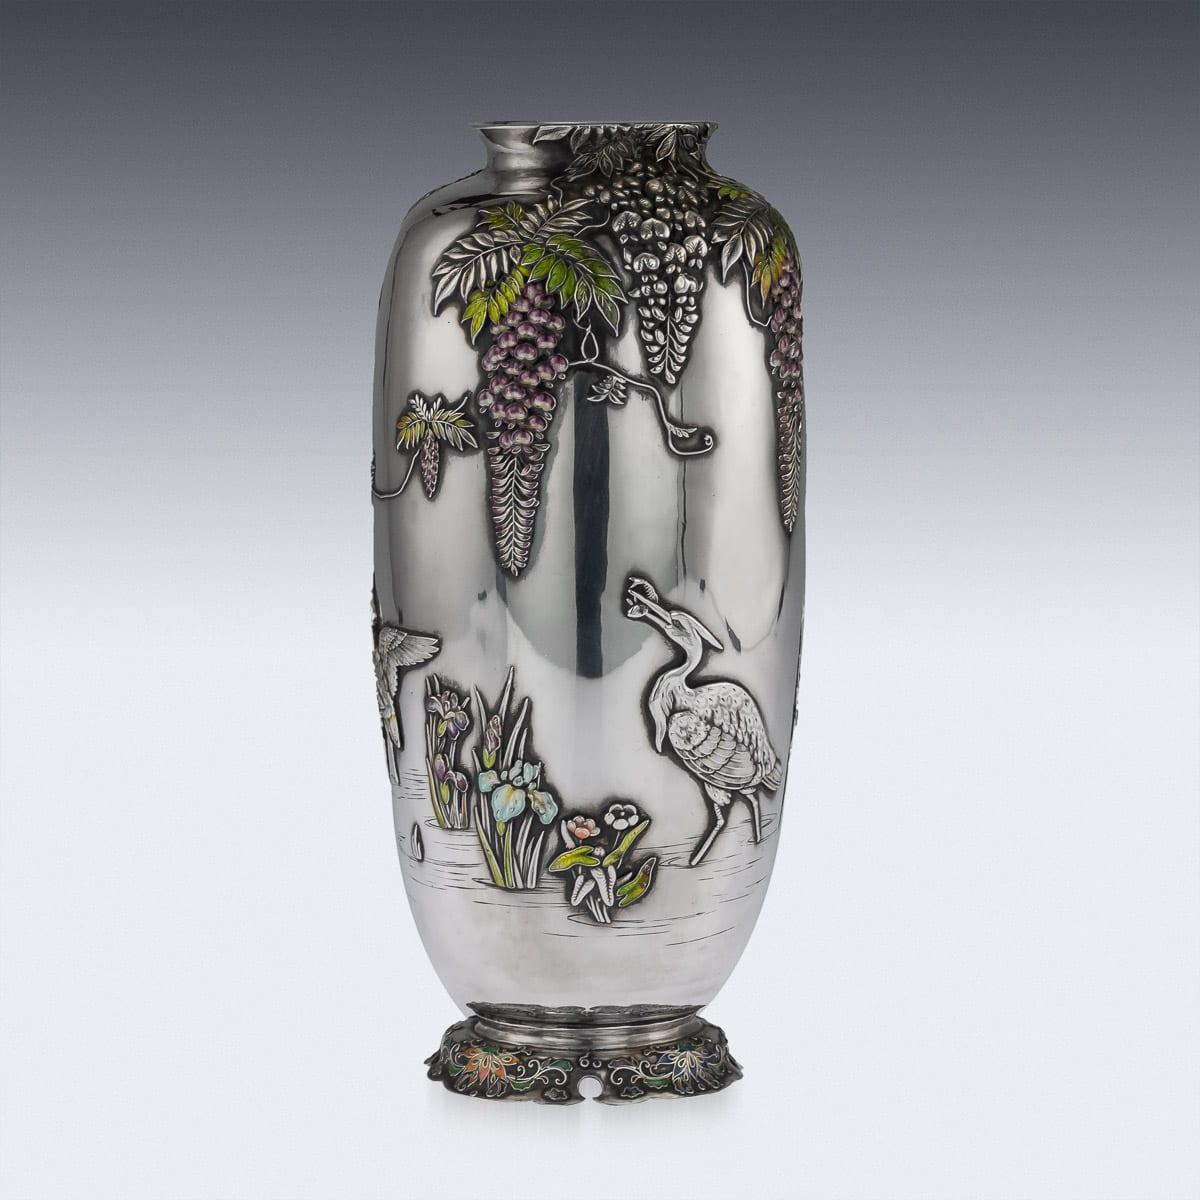 Antique early 20th century Japanese Meiji period solid silver and enamel vase on quarto-form base with enameled scrolling foliage, the sides chased and applied with enameled wisteria, exotic birds amongst a continuous riverside landscape. Hallmarked